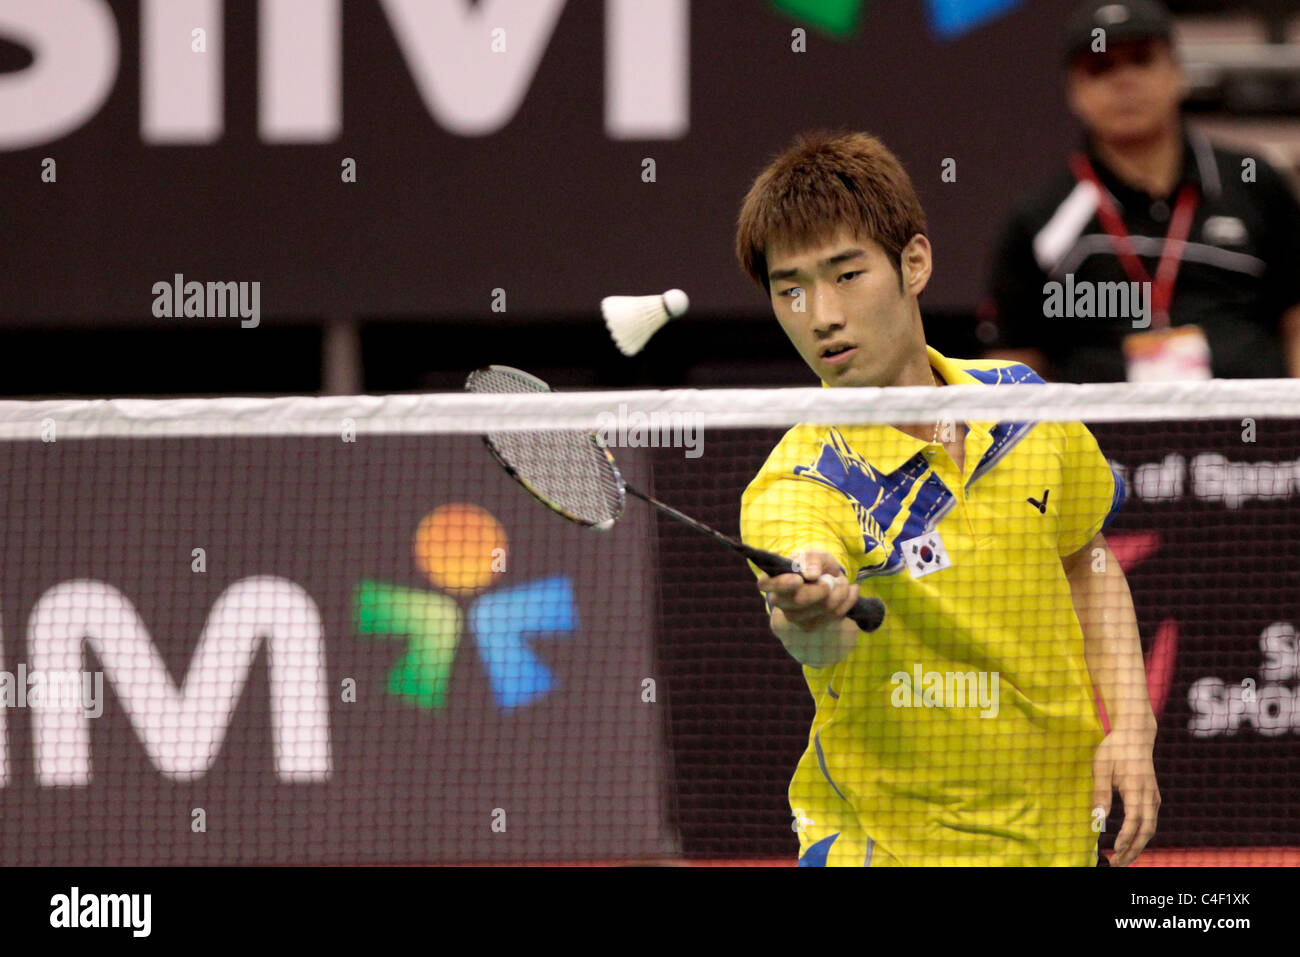 Kim Min Seo and Cho Gun Woo during the Men's Doubles Qualification of the Li-Ning Singapore Open 2011. Stock Photo